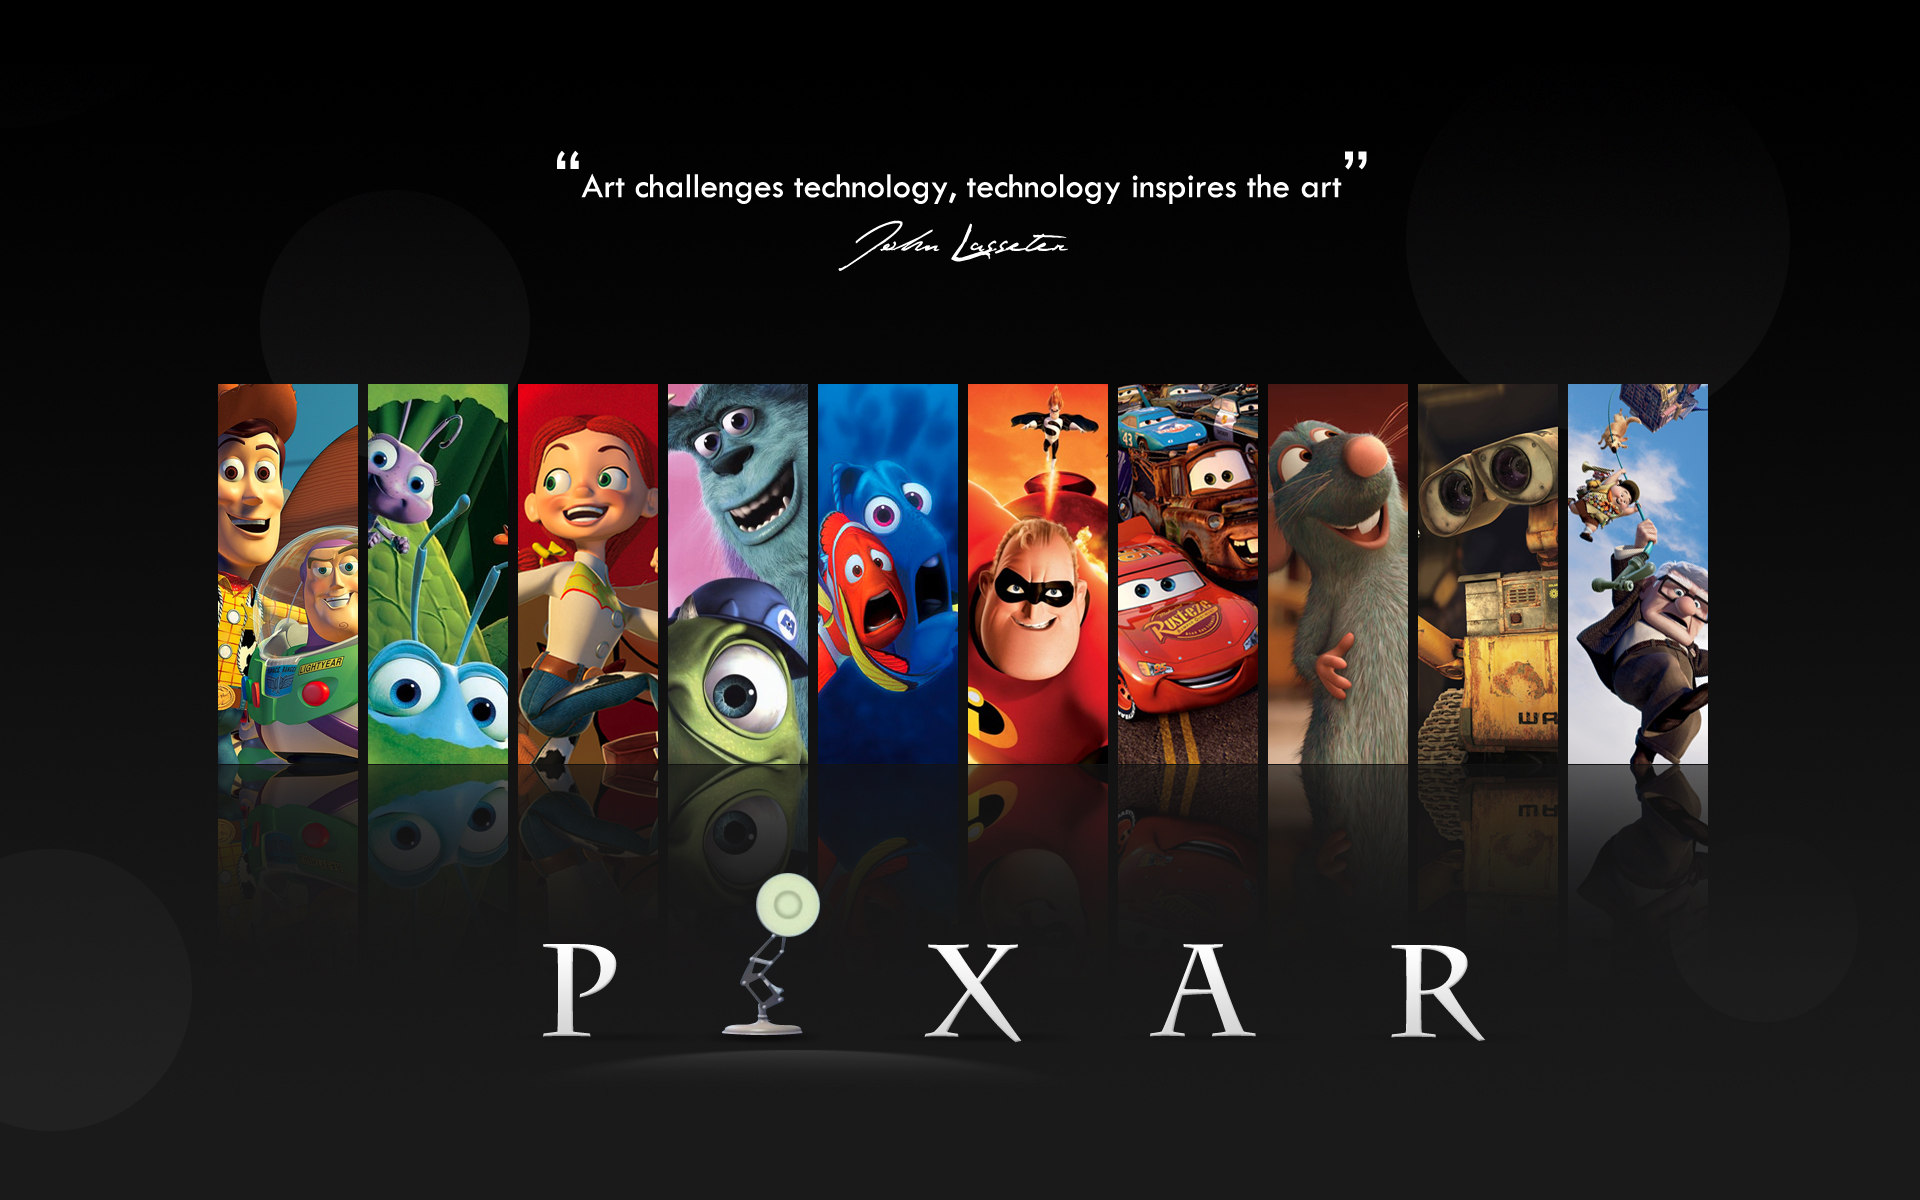 Pixar, movies, Wall-E, cars, quotes, Up (movie), Finding Nemo, Ratatouille, Toy Story, The Incredibles, A Bug's Life - desktop wallpaper